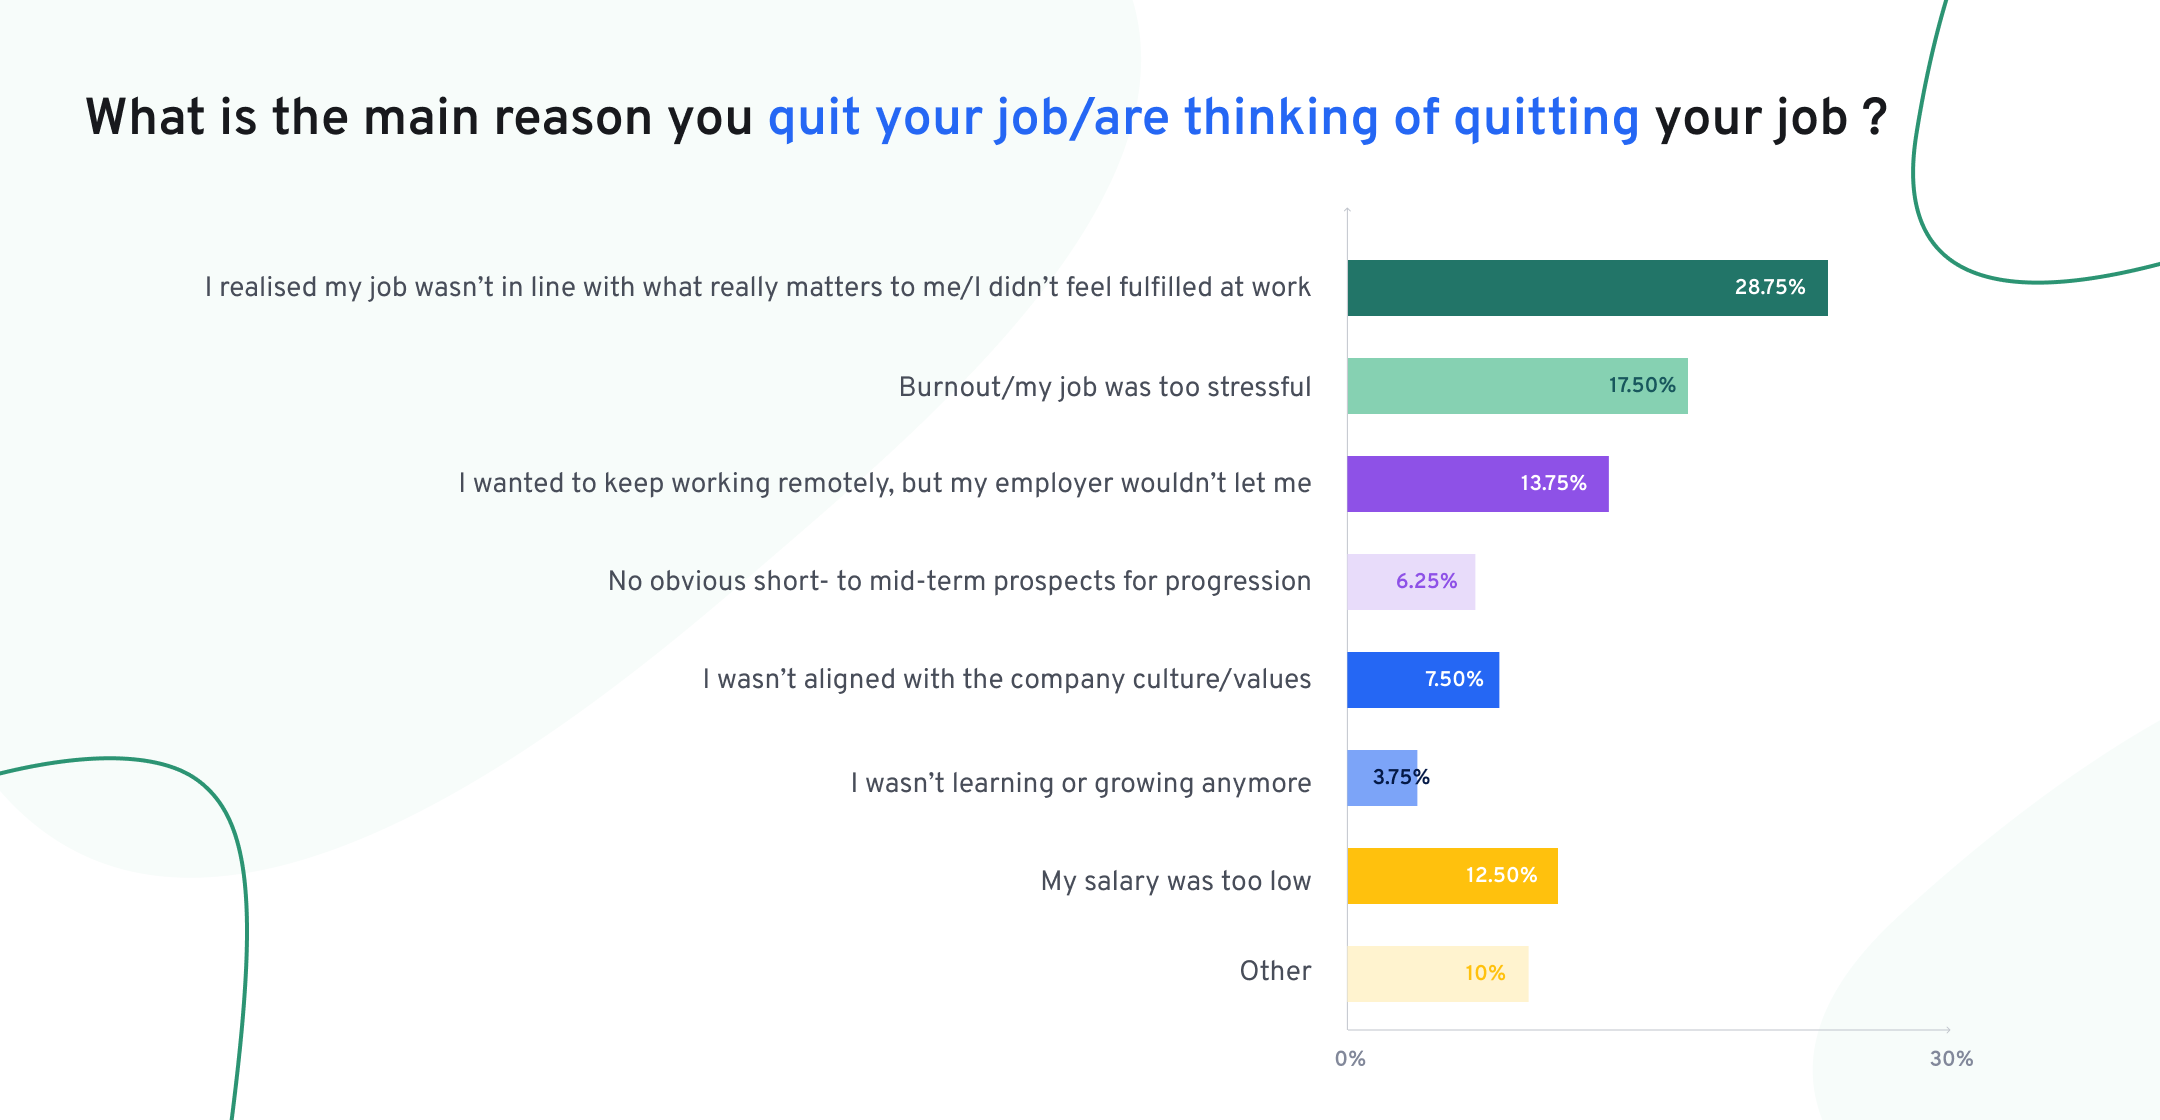 Main reason for quitting your job